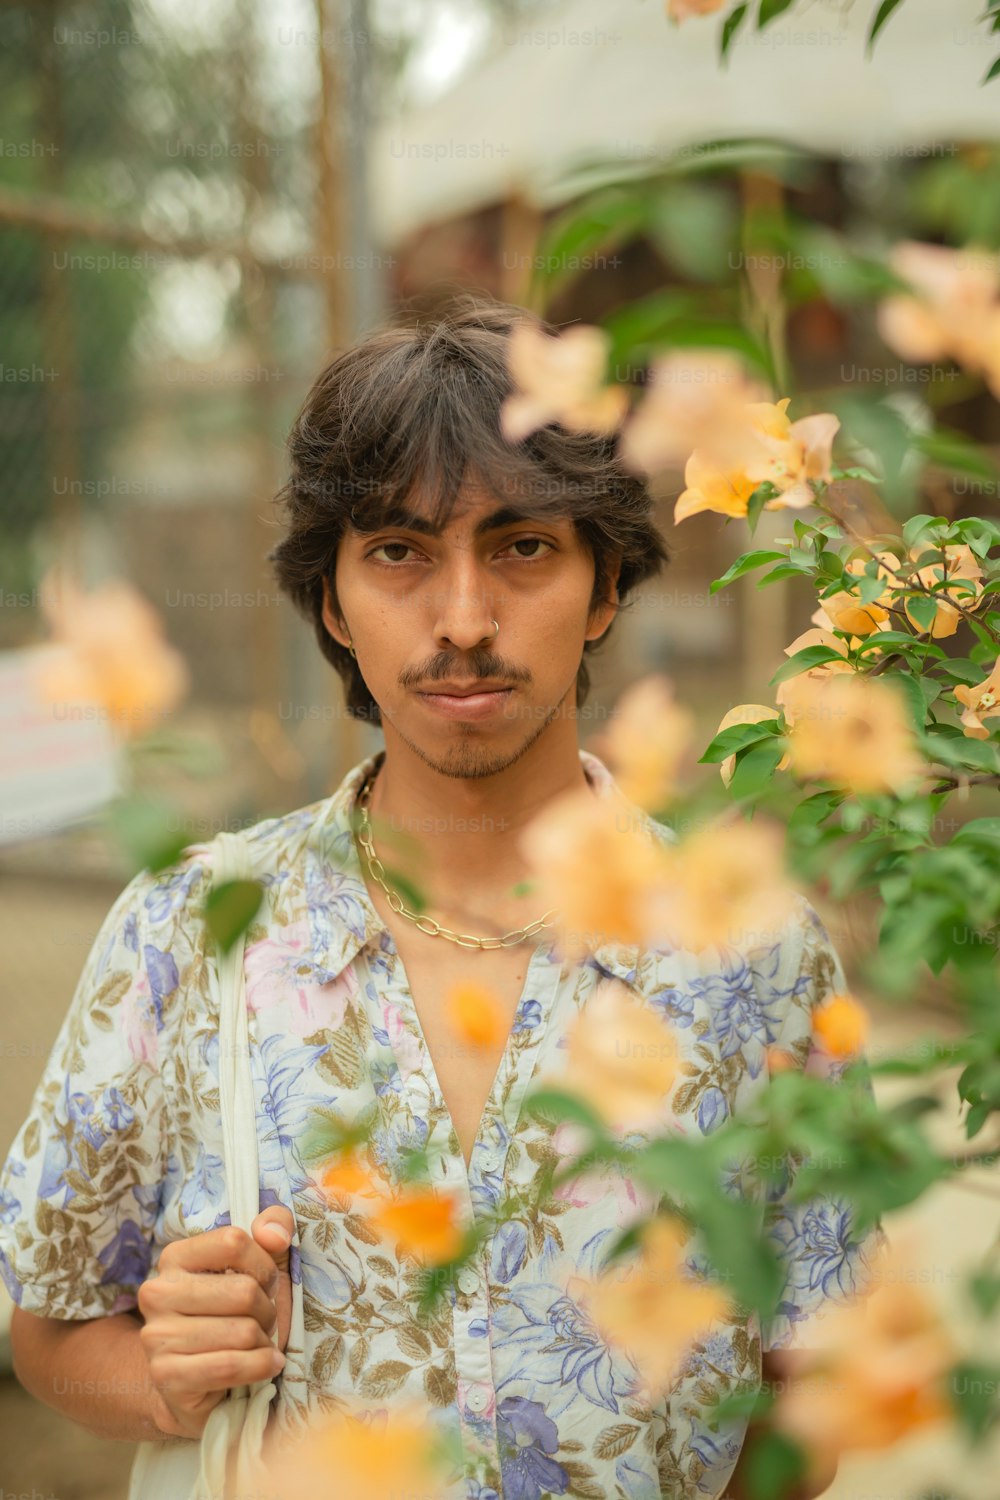 a man with a moustache standing in front of flowers